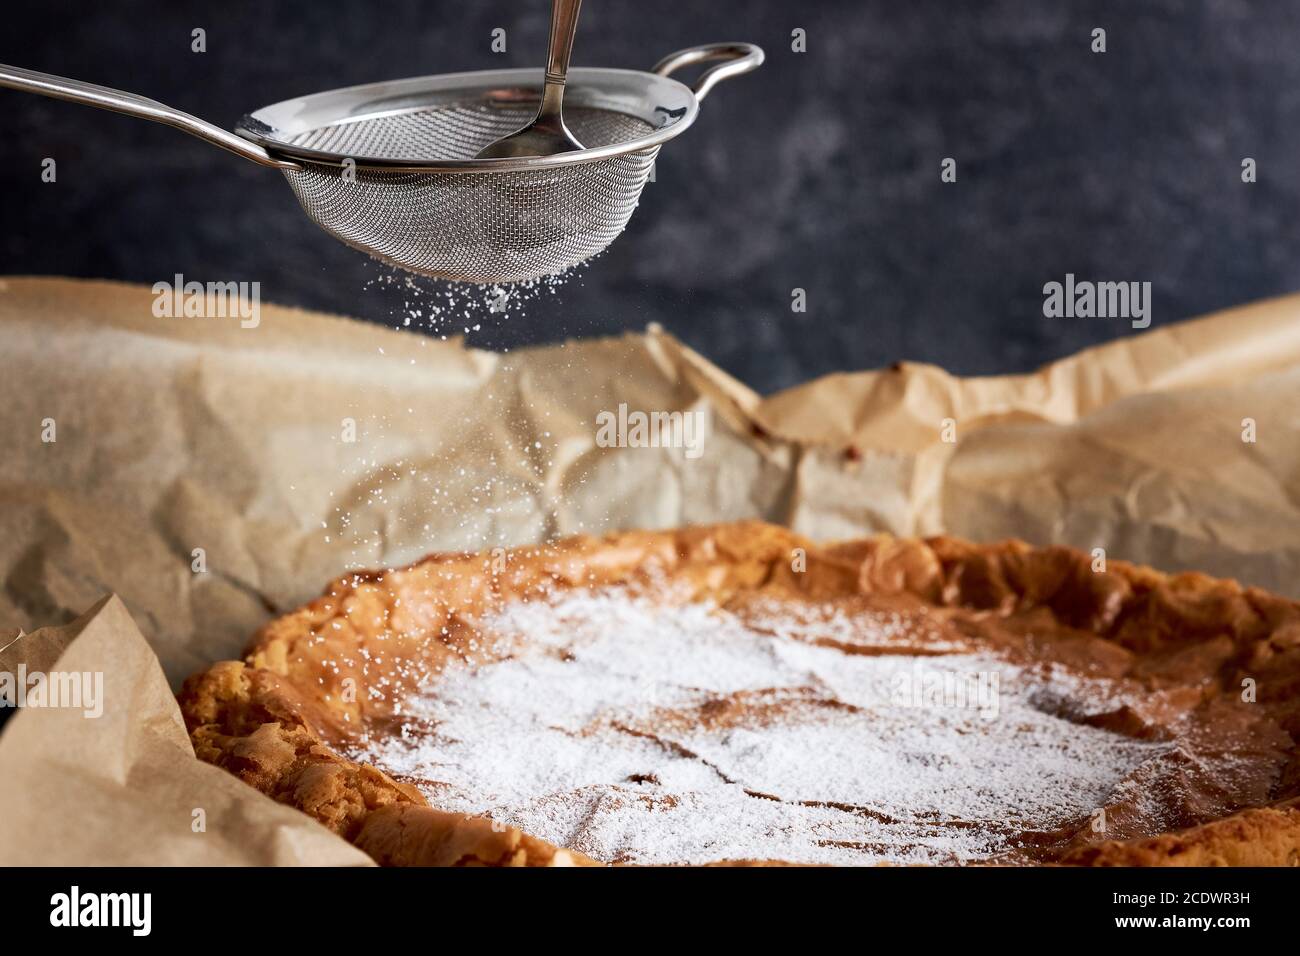 Cake is decorated with powdered sugar Stock Photo